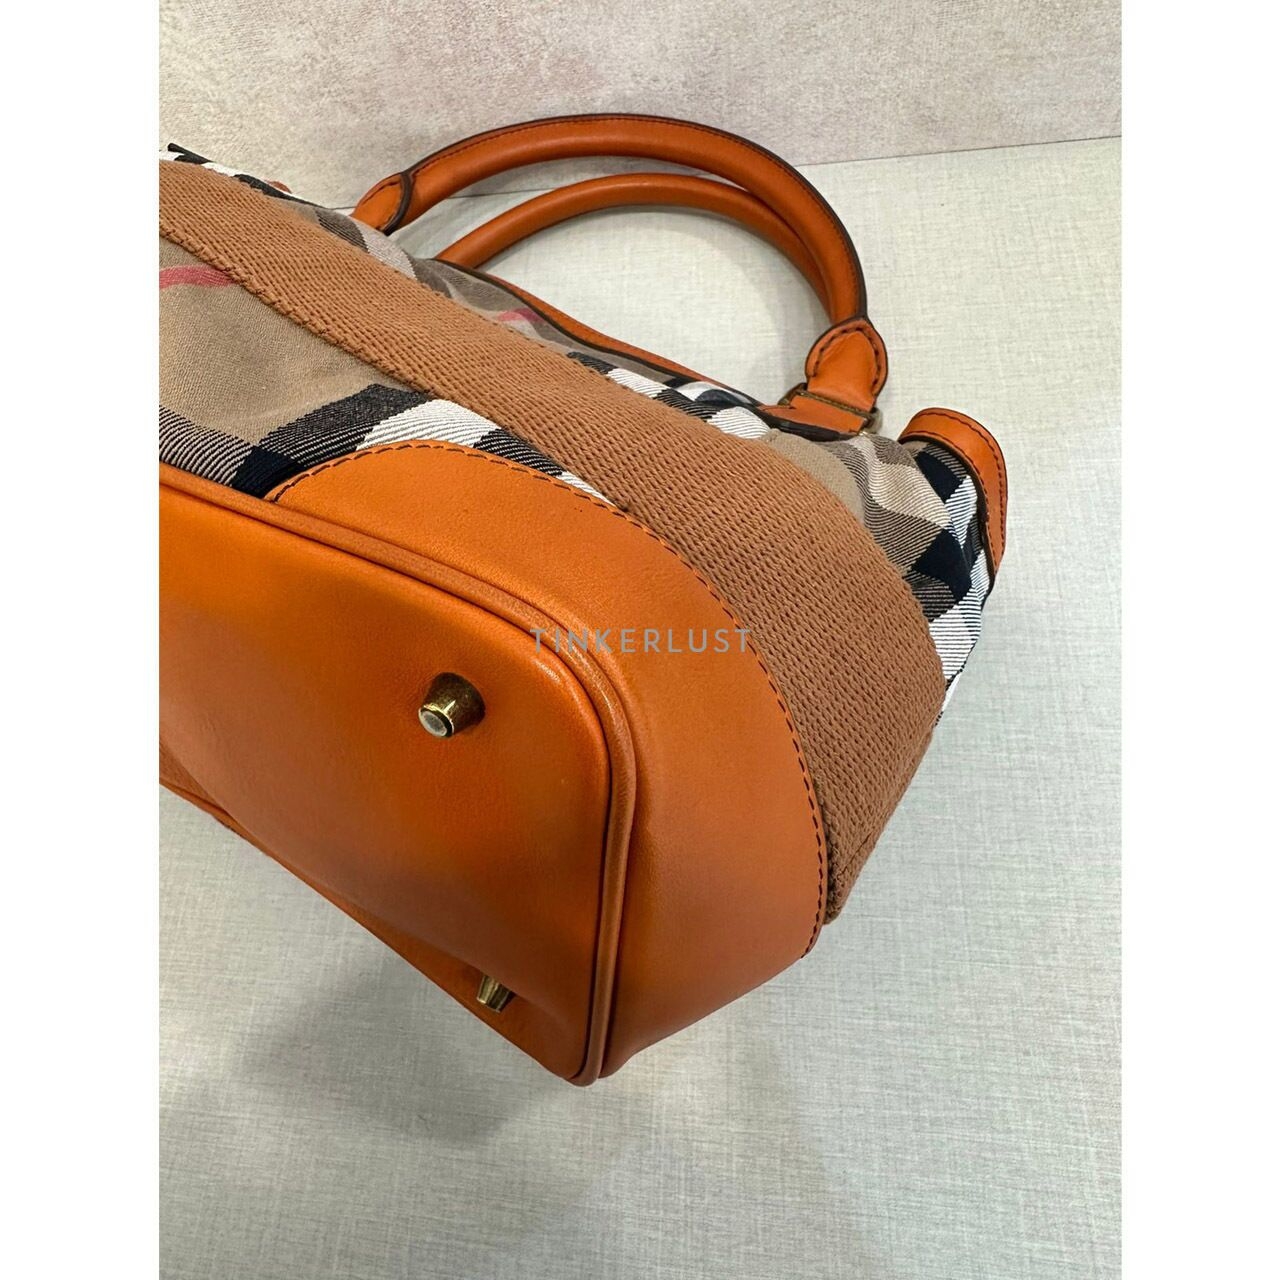 Burberry House Check Bag with Strap Orange Satchel